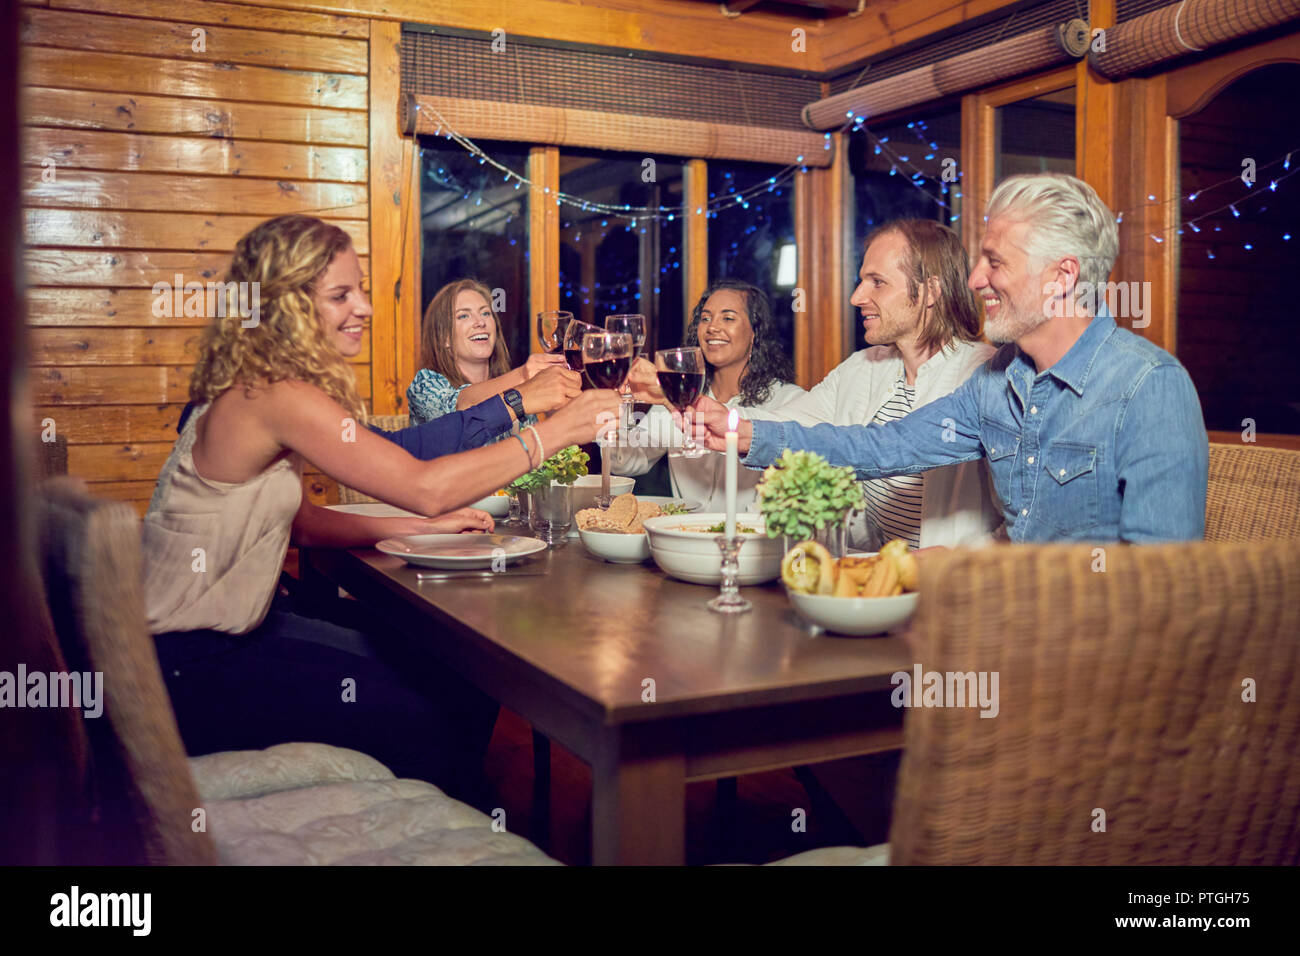 Friends toasting red wine glasses, enjoying dinner at cabin dining room table Stock Photo